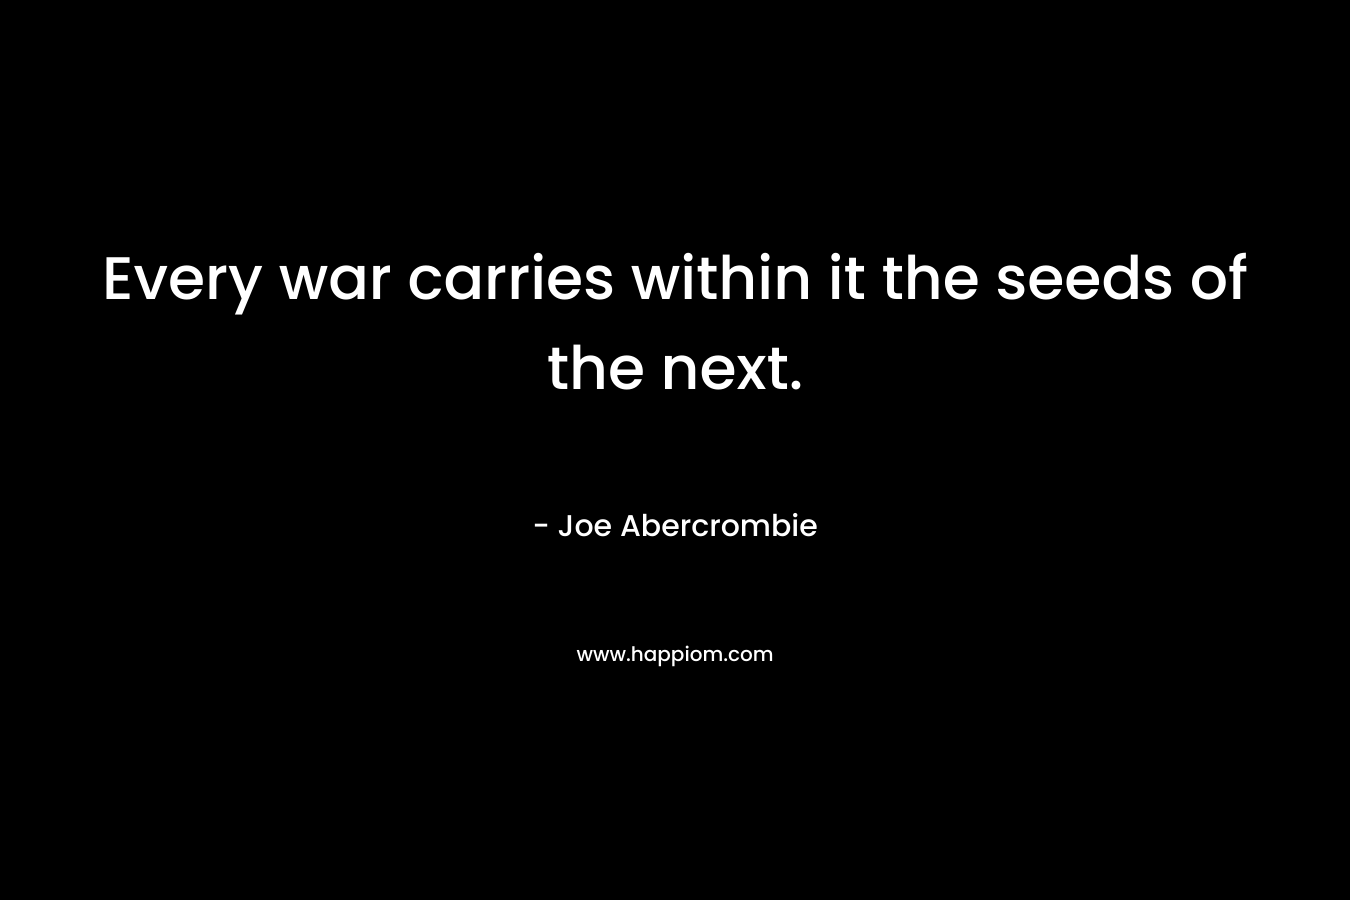 Every war carries within it the seeds of the next.